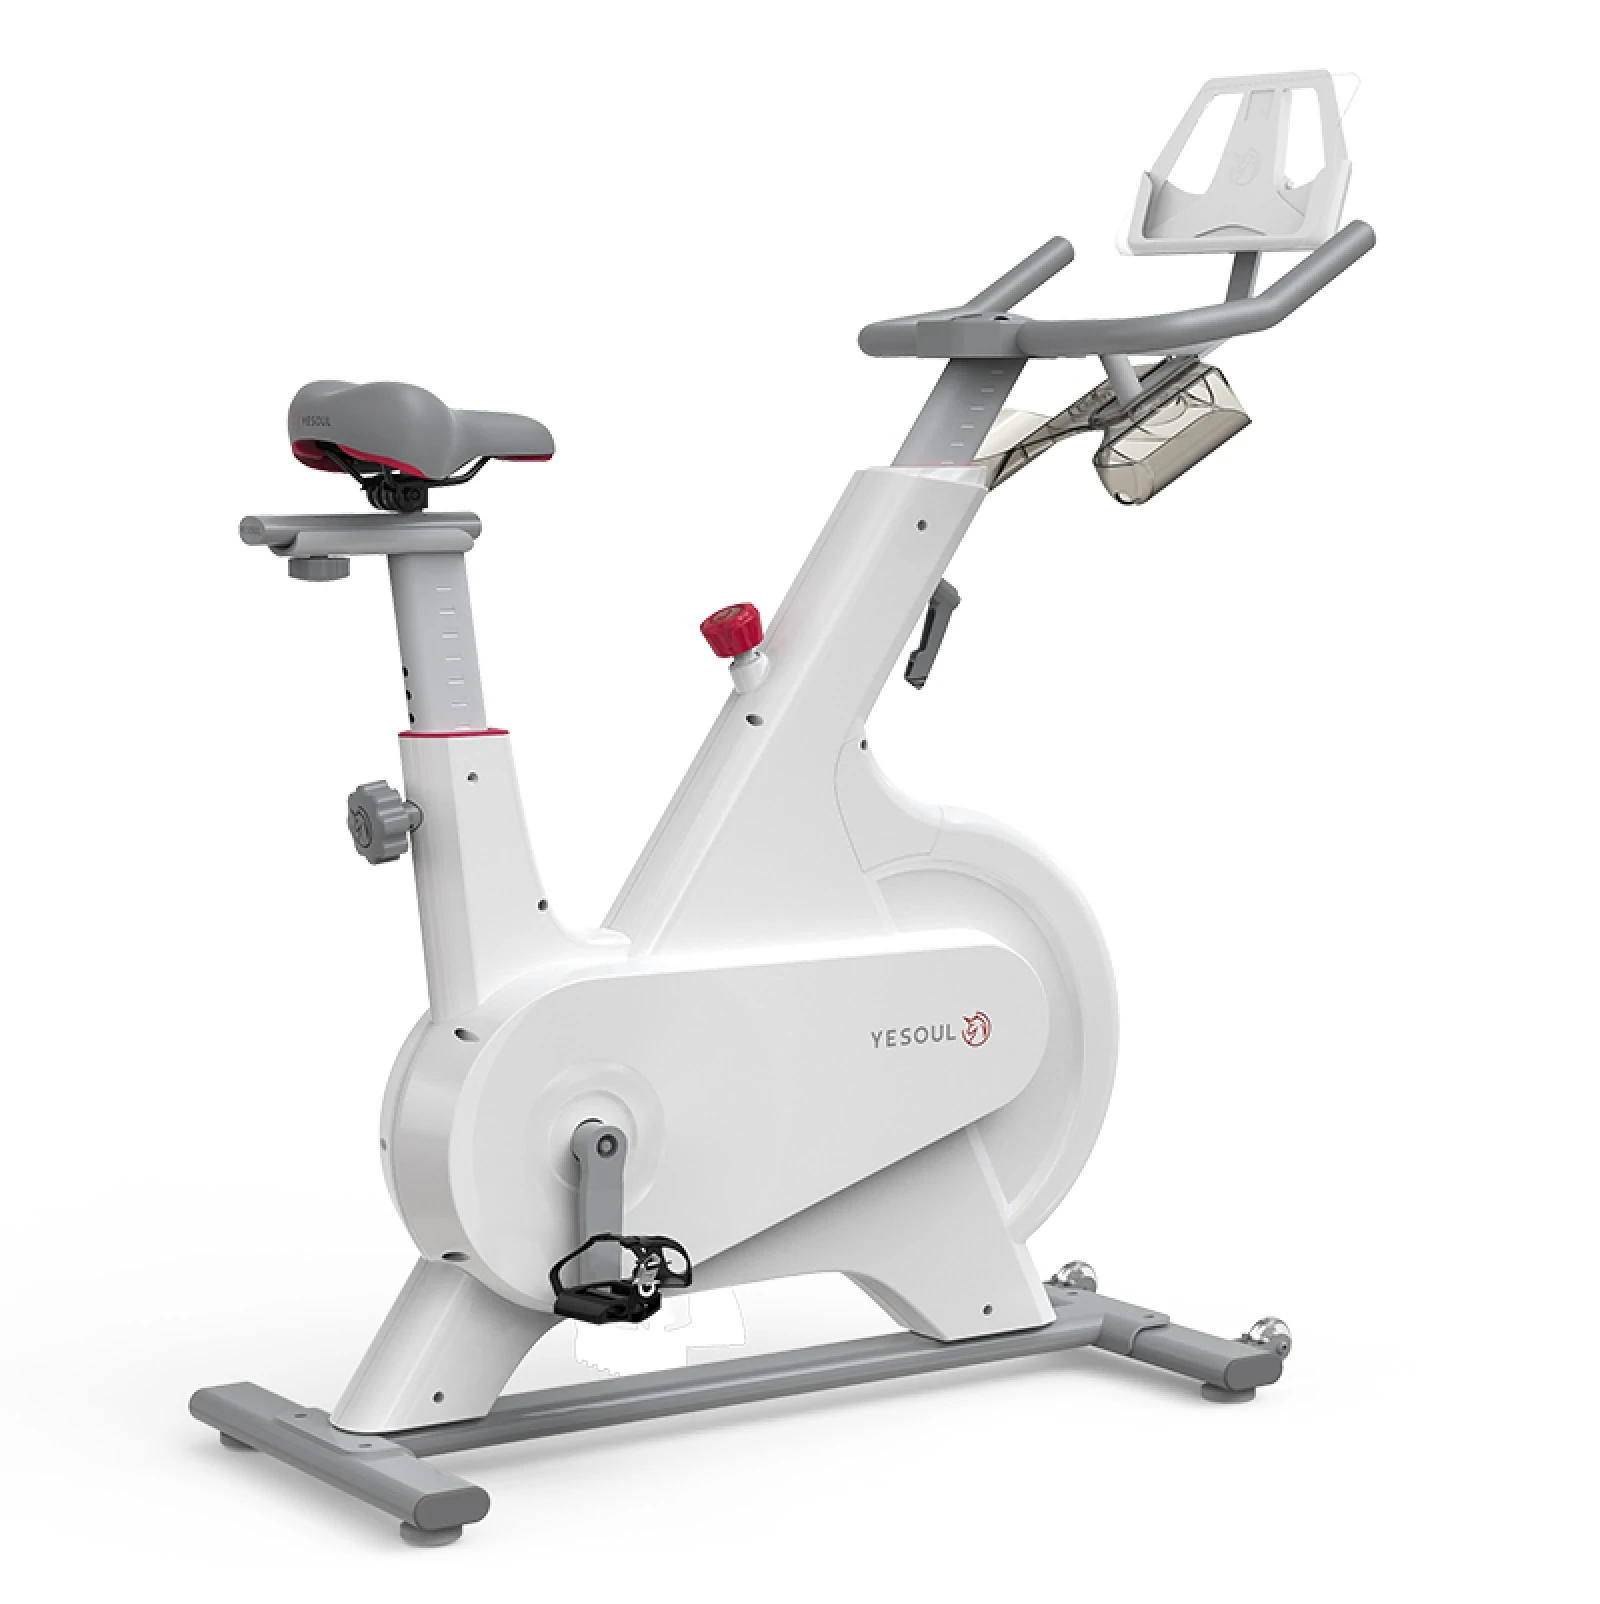 Xiaomi Yesoul M1 Smart Exercise Spin Bike